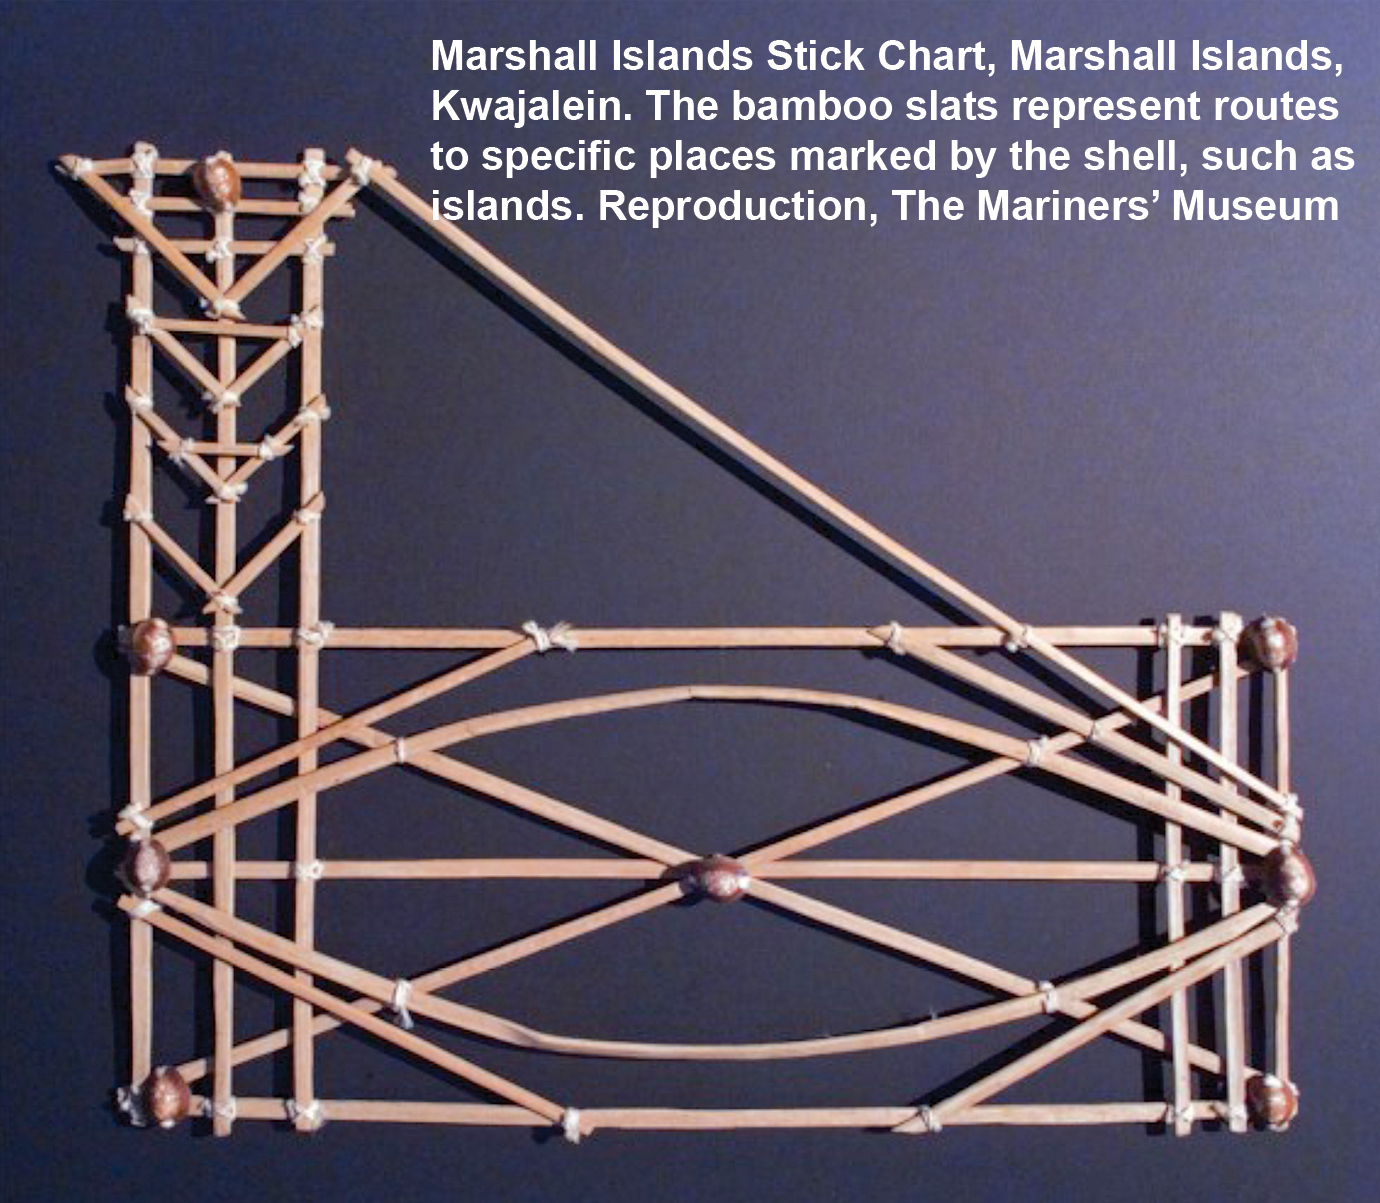 As Captain James Cook was conducting his voyages of exploration and discovery, Polynesian navigators had already successfully explored and settled the islands from New Zealand to Hawaii. Remarkably, the Polynesians had developed a sophisticated and reliable means of wayfinding based not on science and mathematics, but rather on their innate knowledge of the seas and sky.